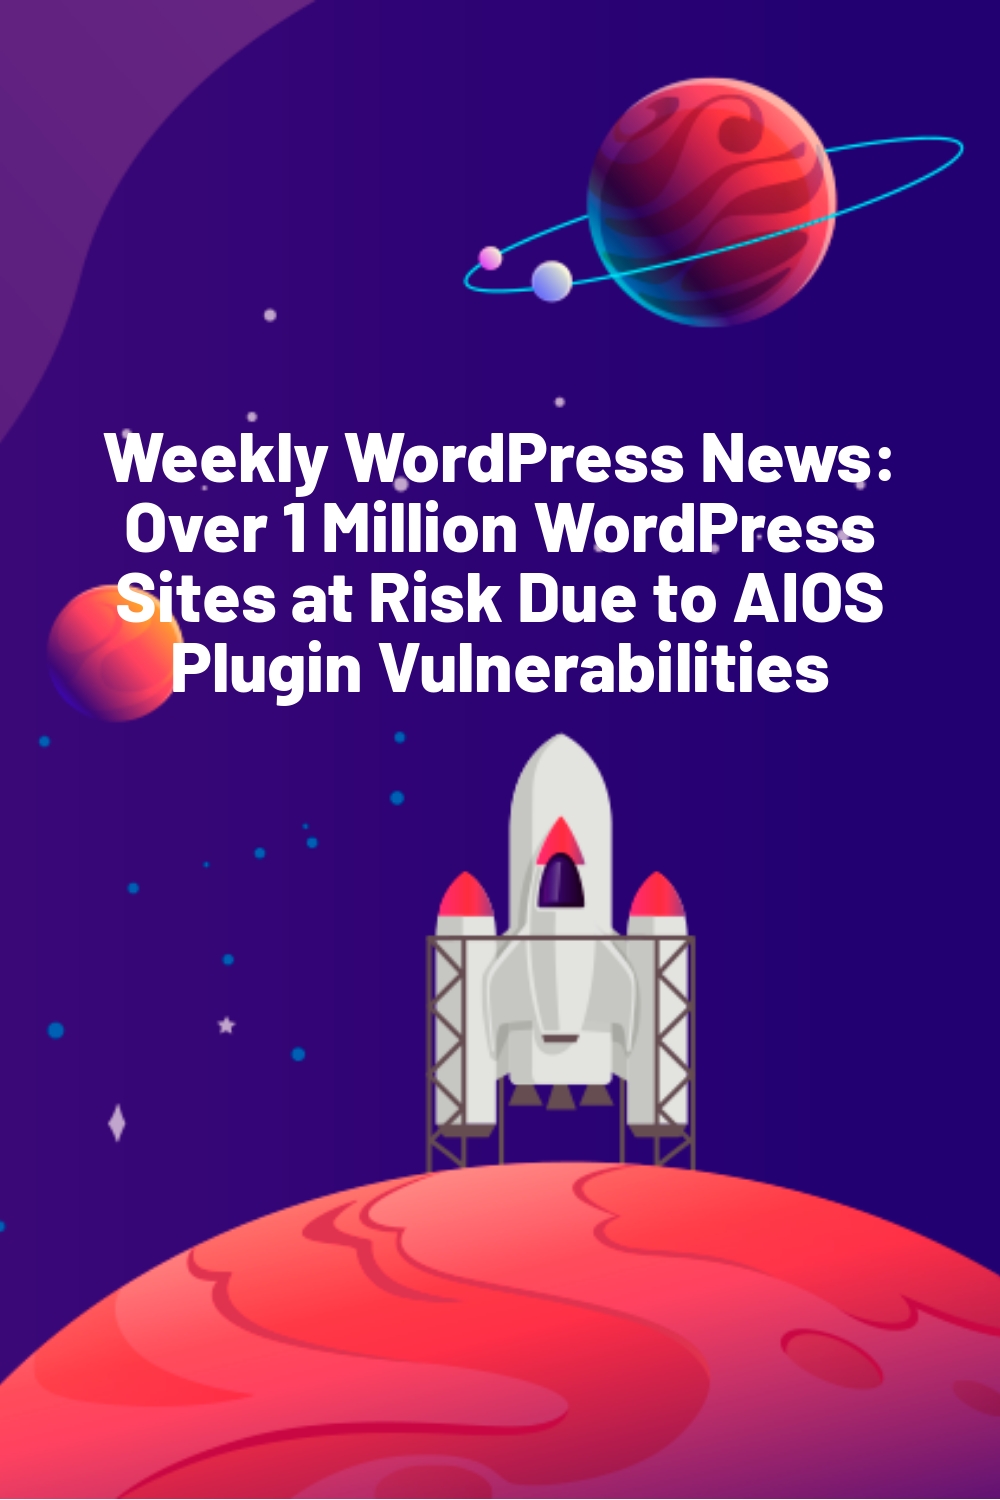 Weekly WordPress News: Over 1 Million WordPress Sites at Risk Due to AIOS Plugin Vulnerabilities